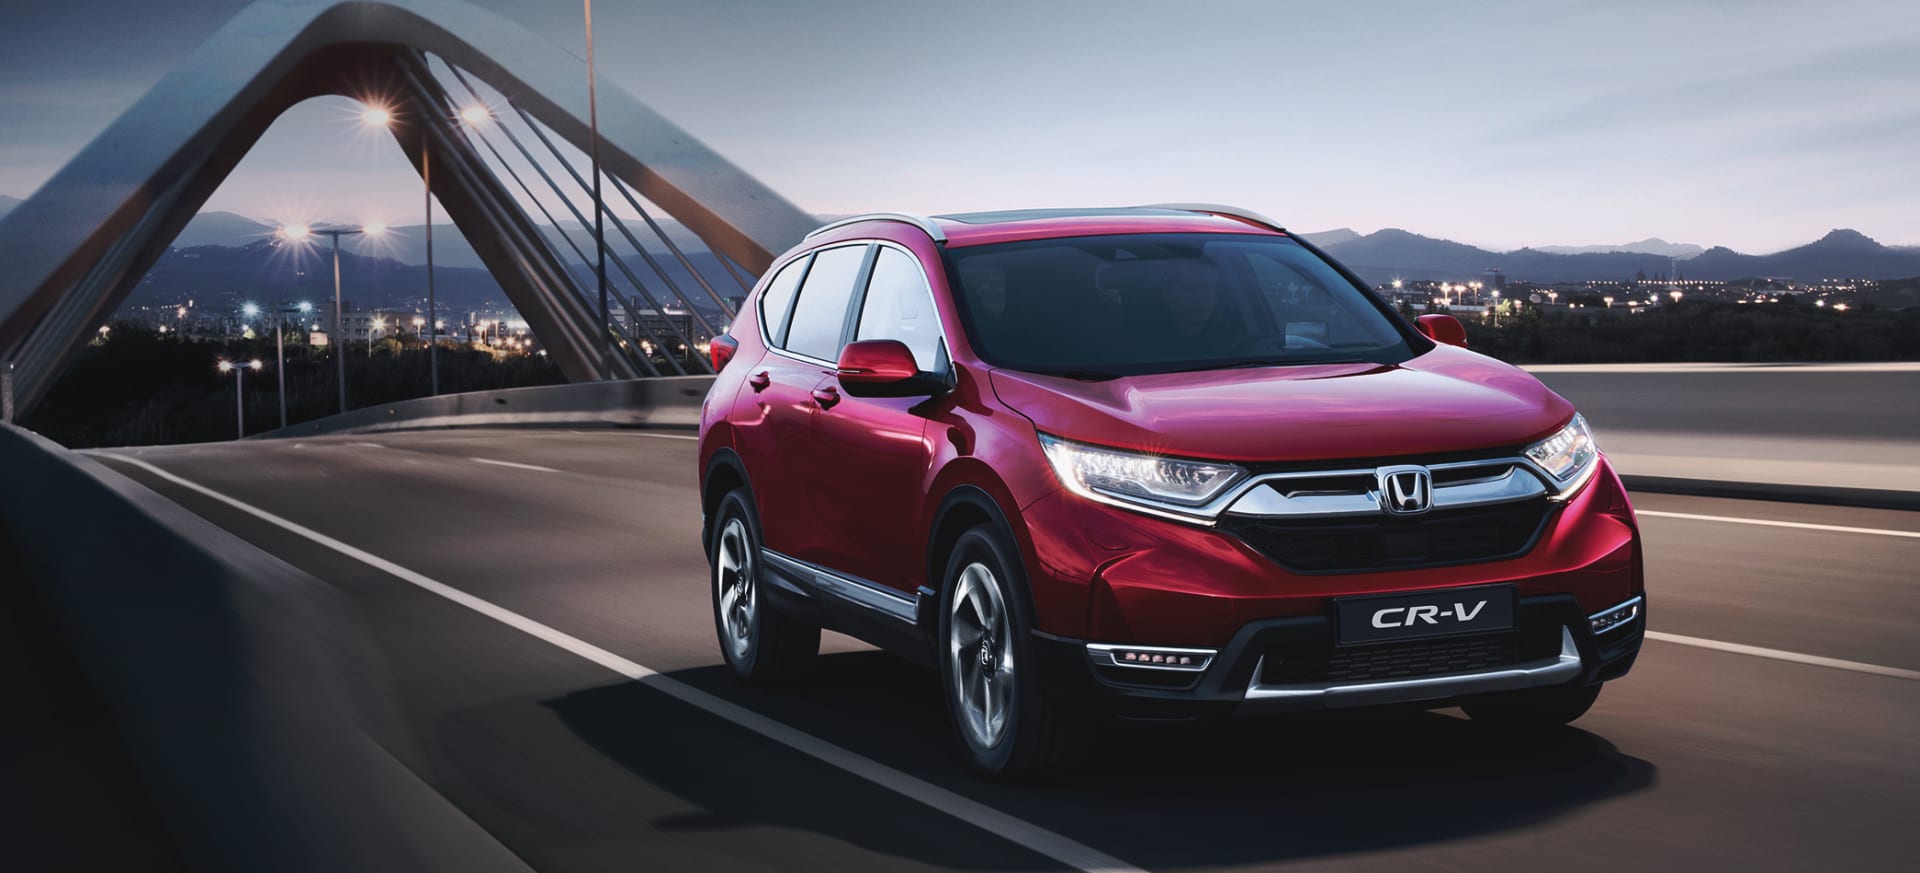 NEW CR-V AWD FROM ONLY £299 PM WITH EXCLUSIVE £2750 DEPOSIT CONTRIBUTION